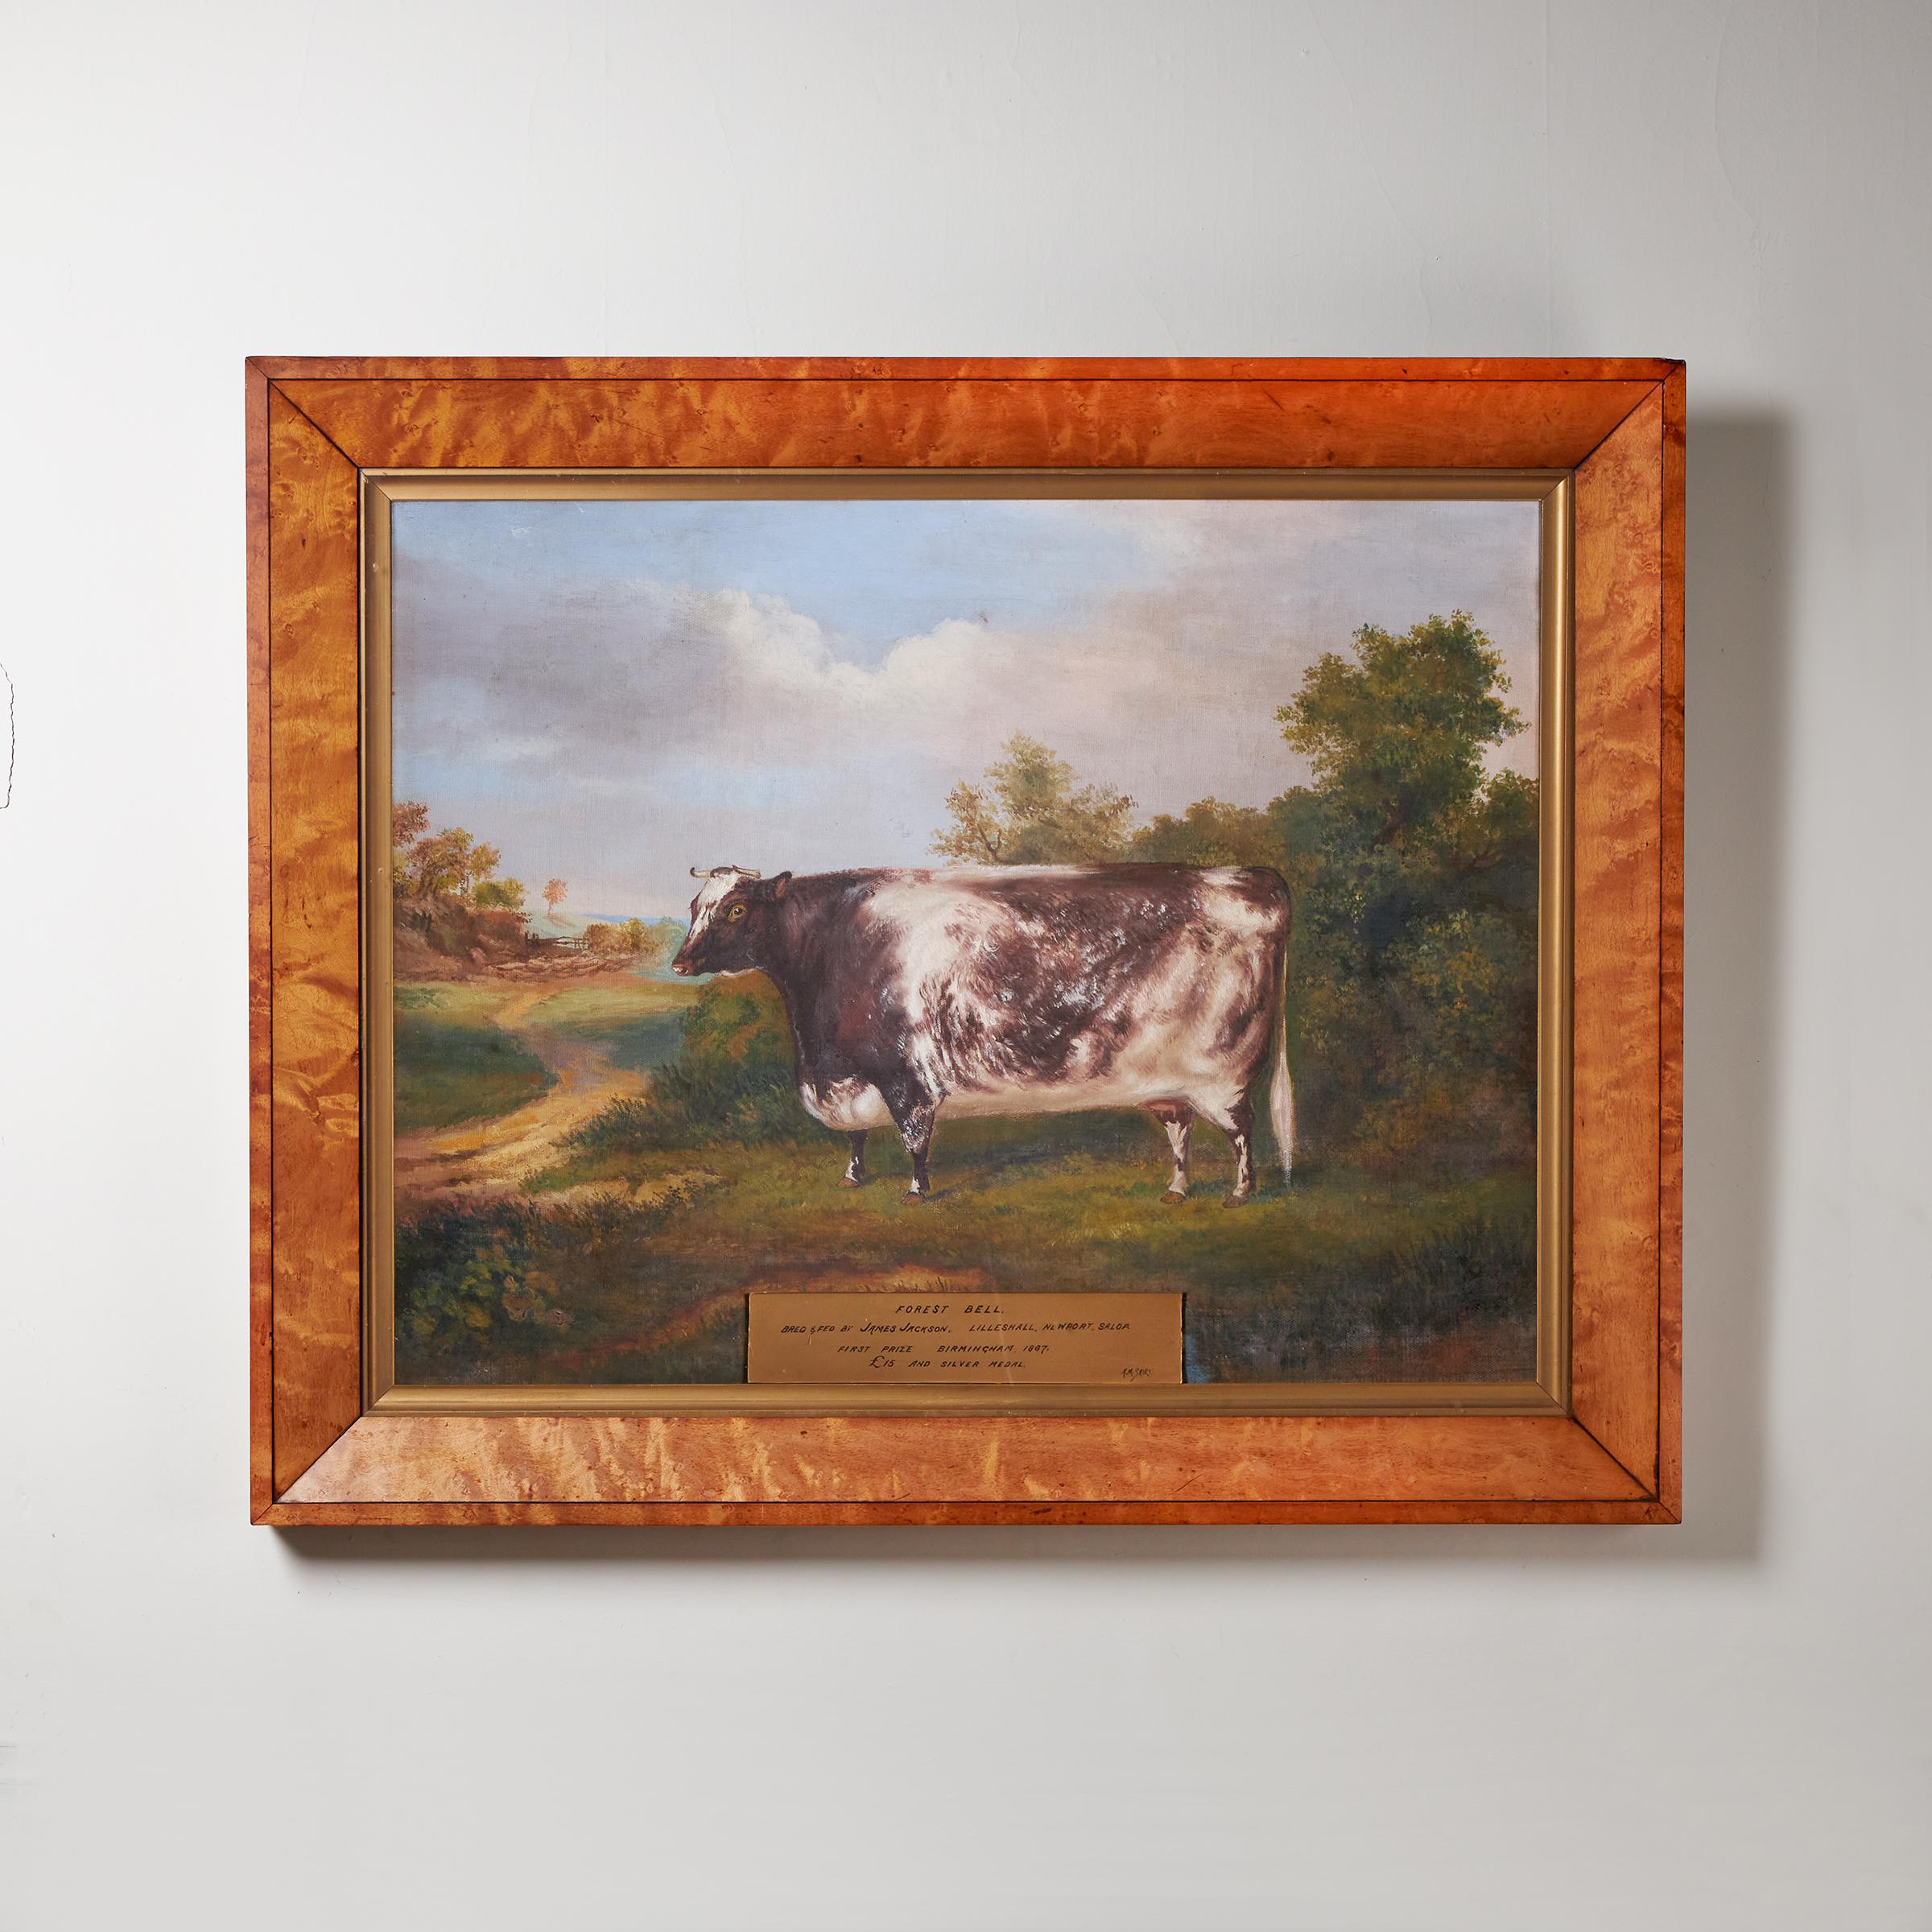 A charming 19th Century portrait of a prize cow - “Forest Bell”.

A 19th century portrait of a prize winning cow in a landscape setting - “Forest Bell” attributed to A M Gauci.  A plaque at the bottom of the frame reads “Forest Bell Bred and fed by